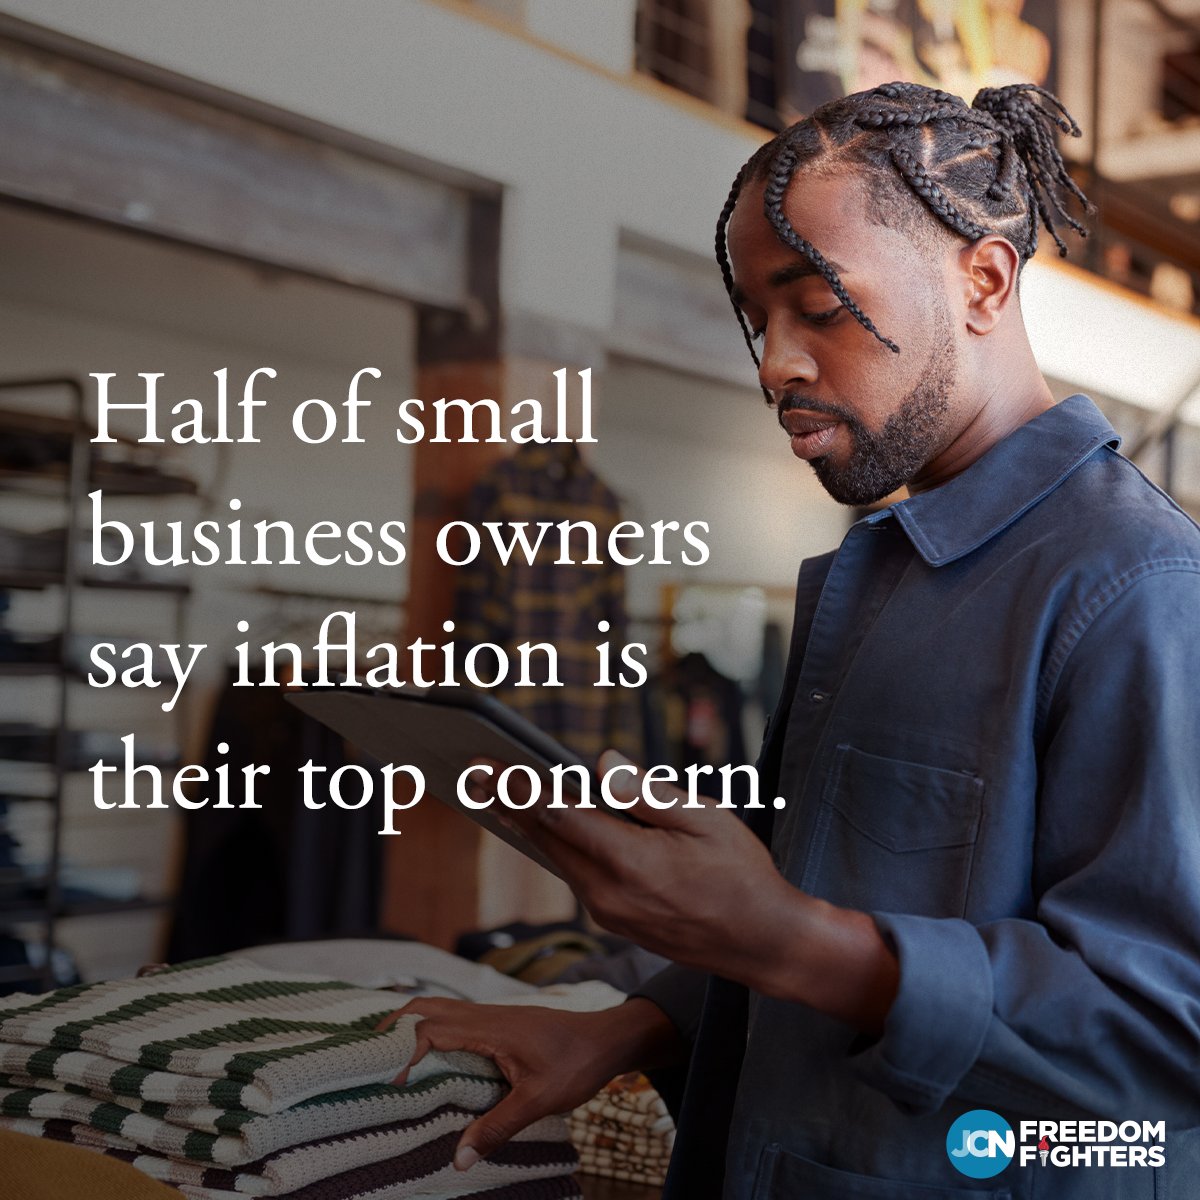 Small businesses hate raising their prices, but in Biden’s economy, they’ve had no choice. This #NationalSmallBusinessWeek, will you join JCN in fighting for policies that will tame inflation instead of spiking it? JoinJCN.com